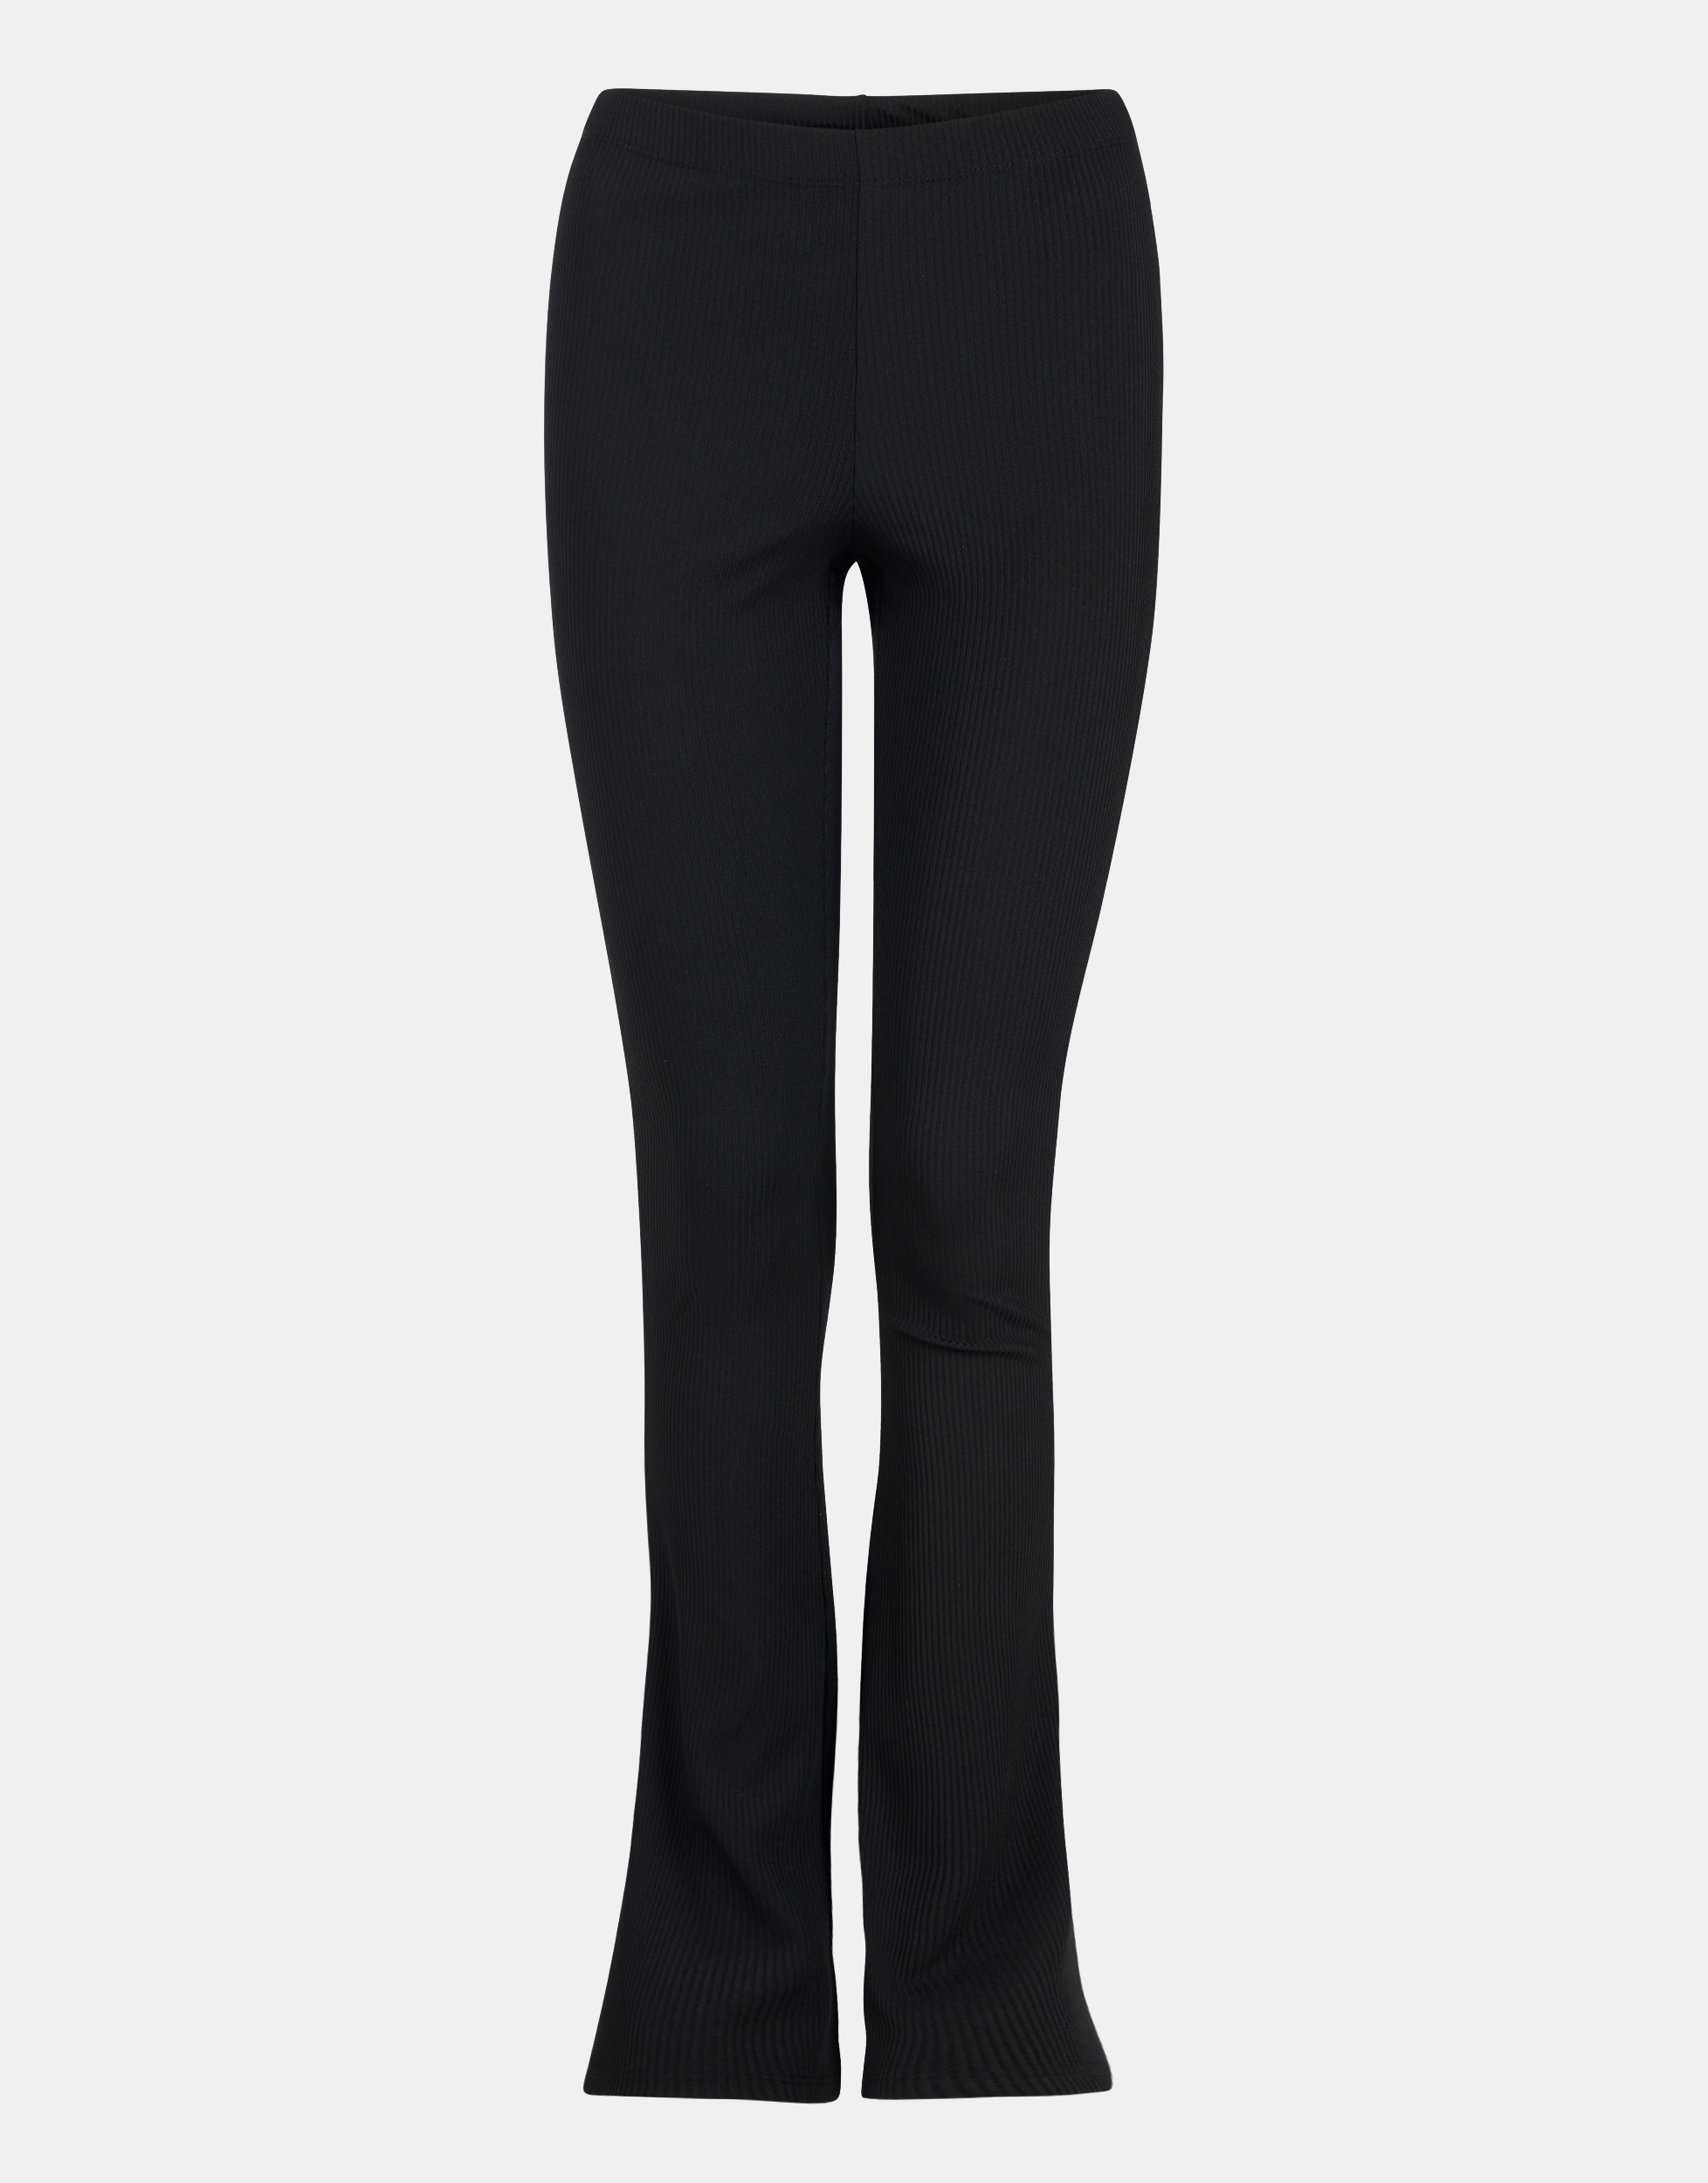 COLLUSION slinky flare trousers in black